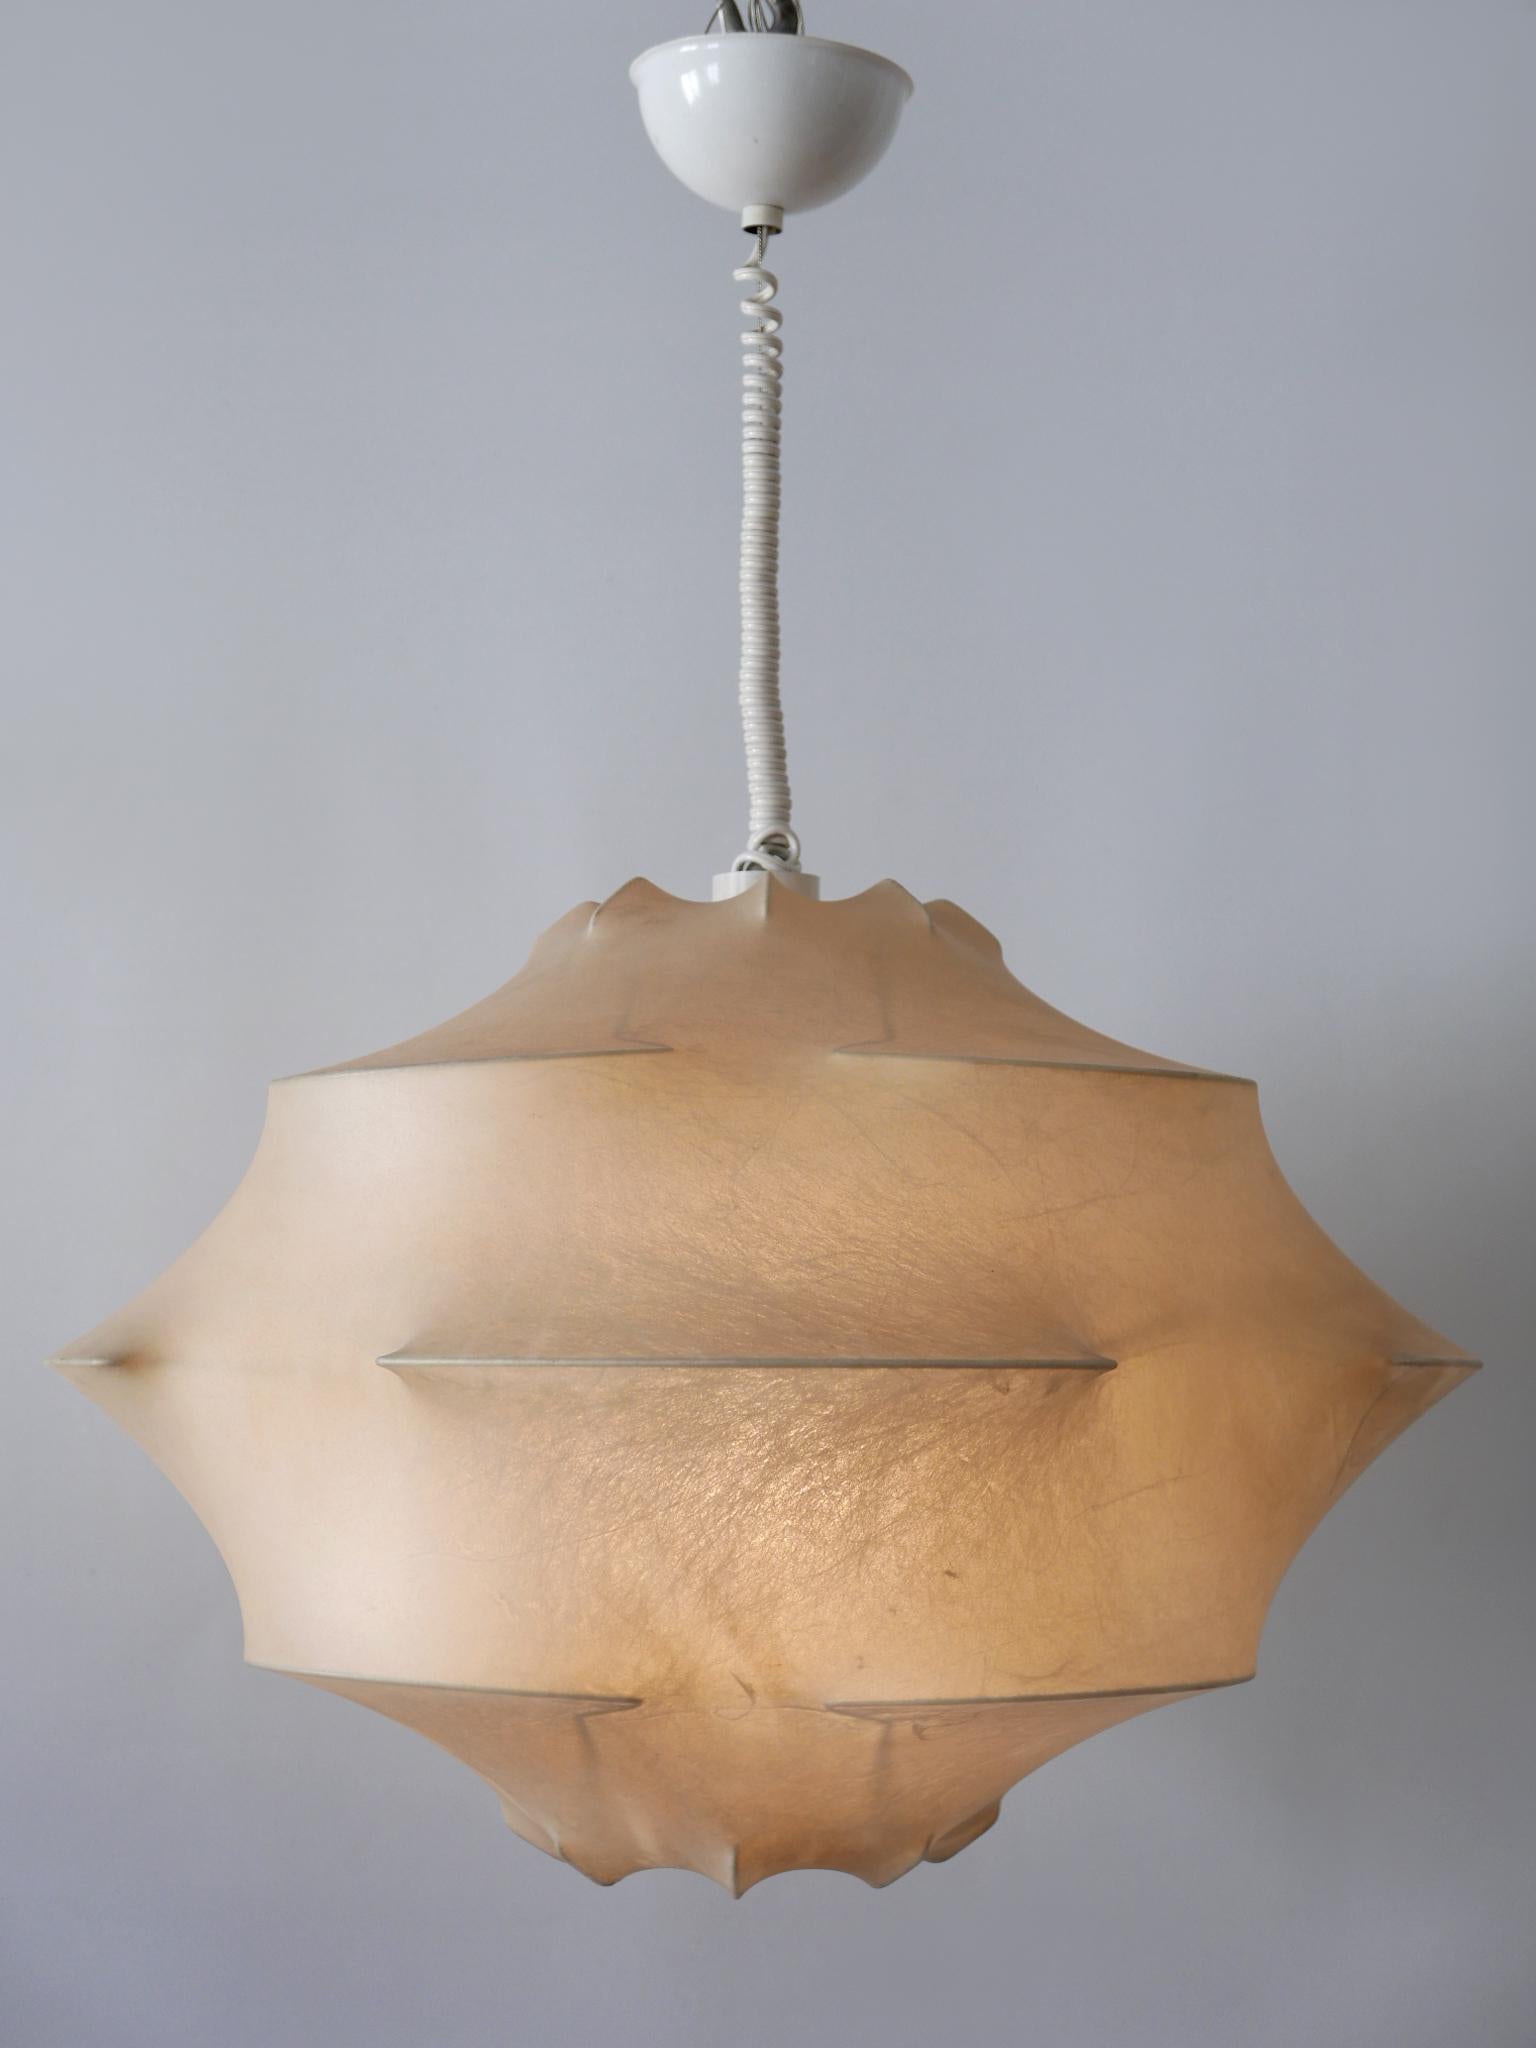 XL Mid-Century Modern Cocoon Pendant Lamp or Hanging Light by Flos Italy, 1960s For Sale 3